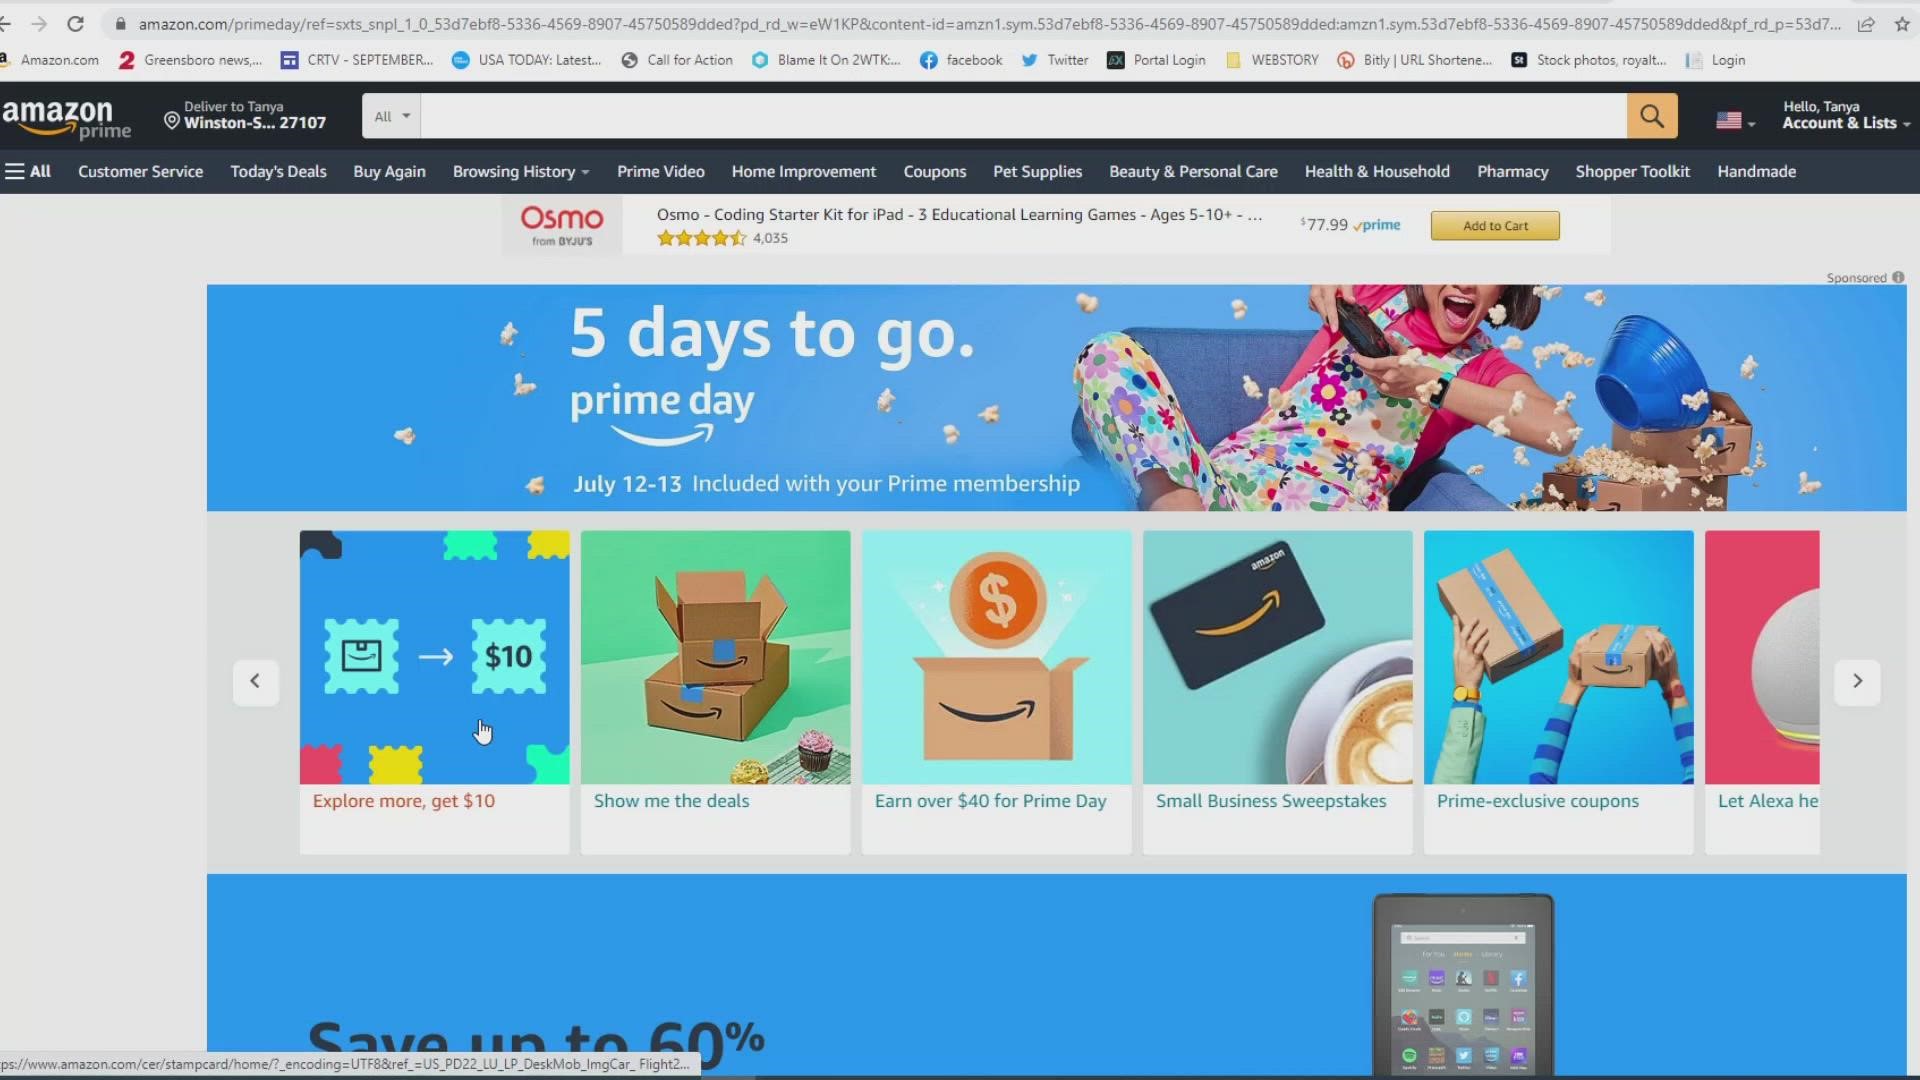 Amazon Prime Day is on July 12 and July 13.